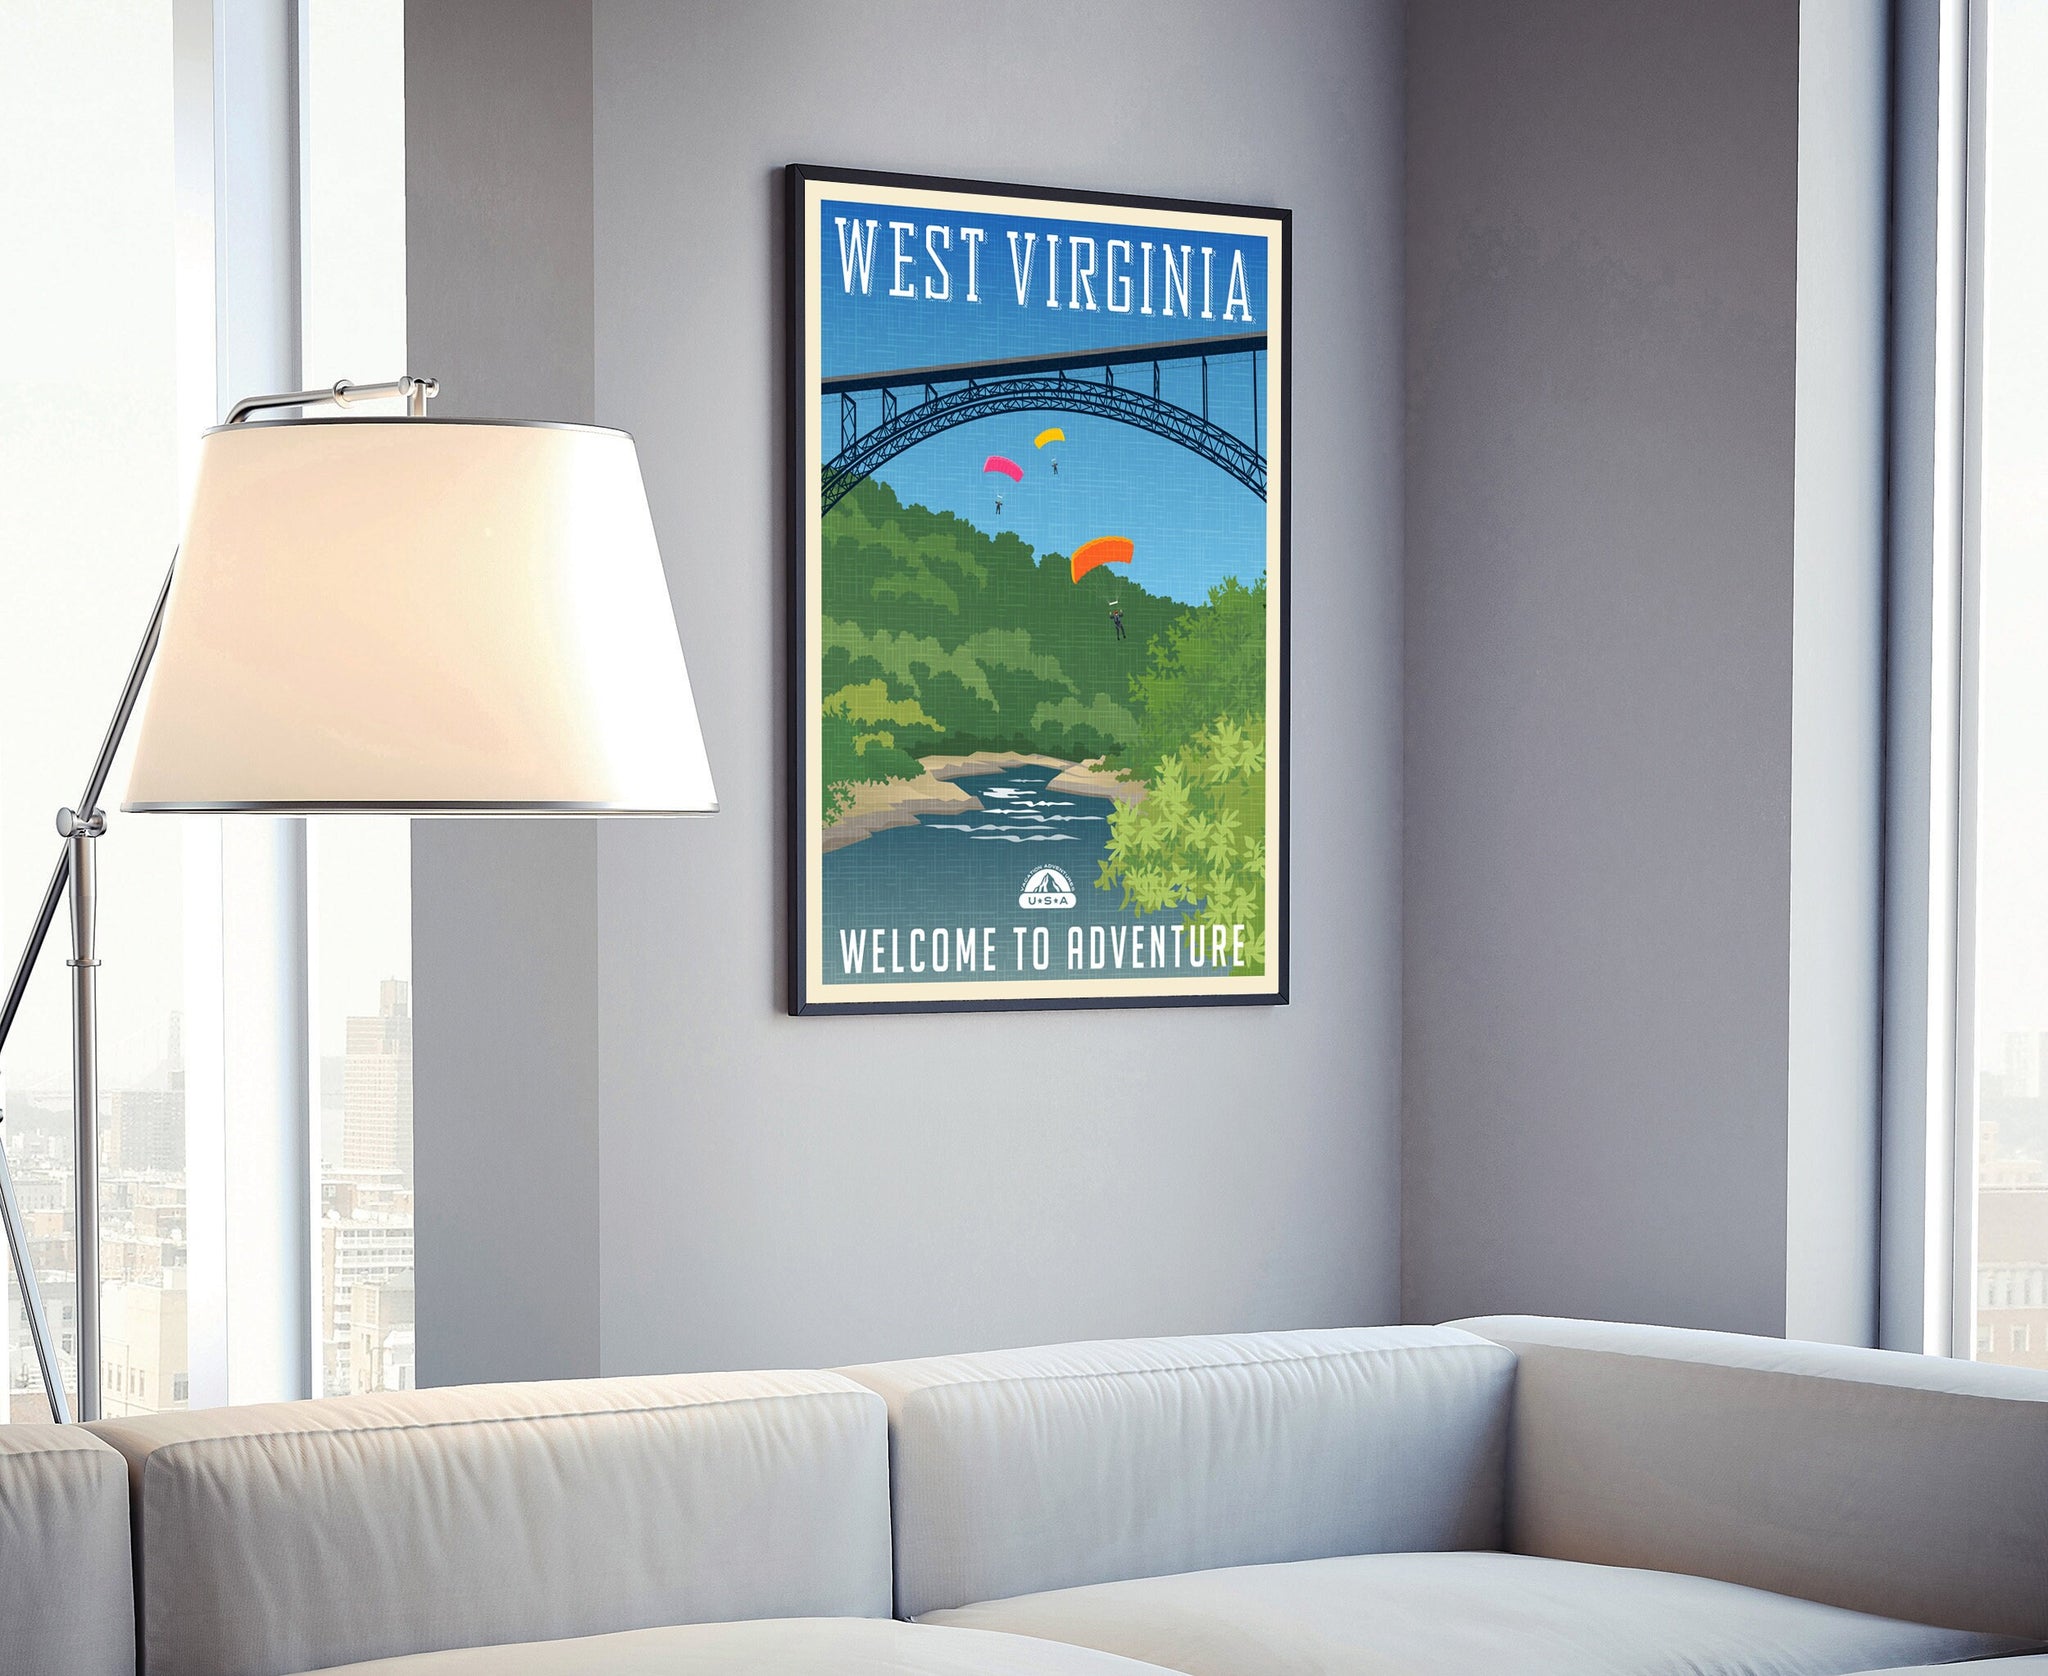 WEST VIRGINIA retro style travel poster, West Virginia vintage rustic poster print, Office wall Decoration, West Virginia state map poster